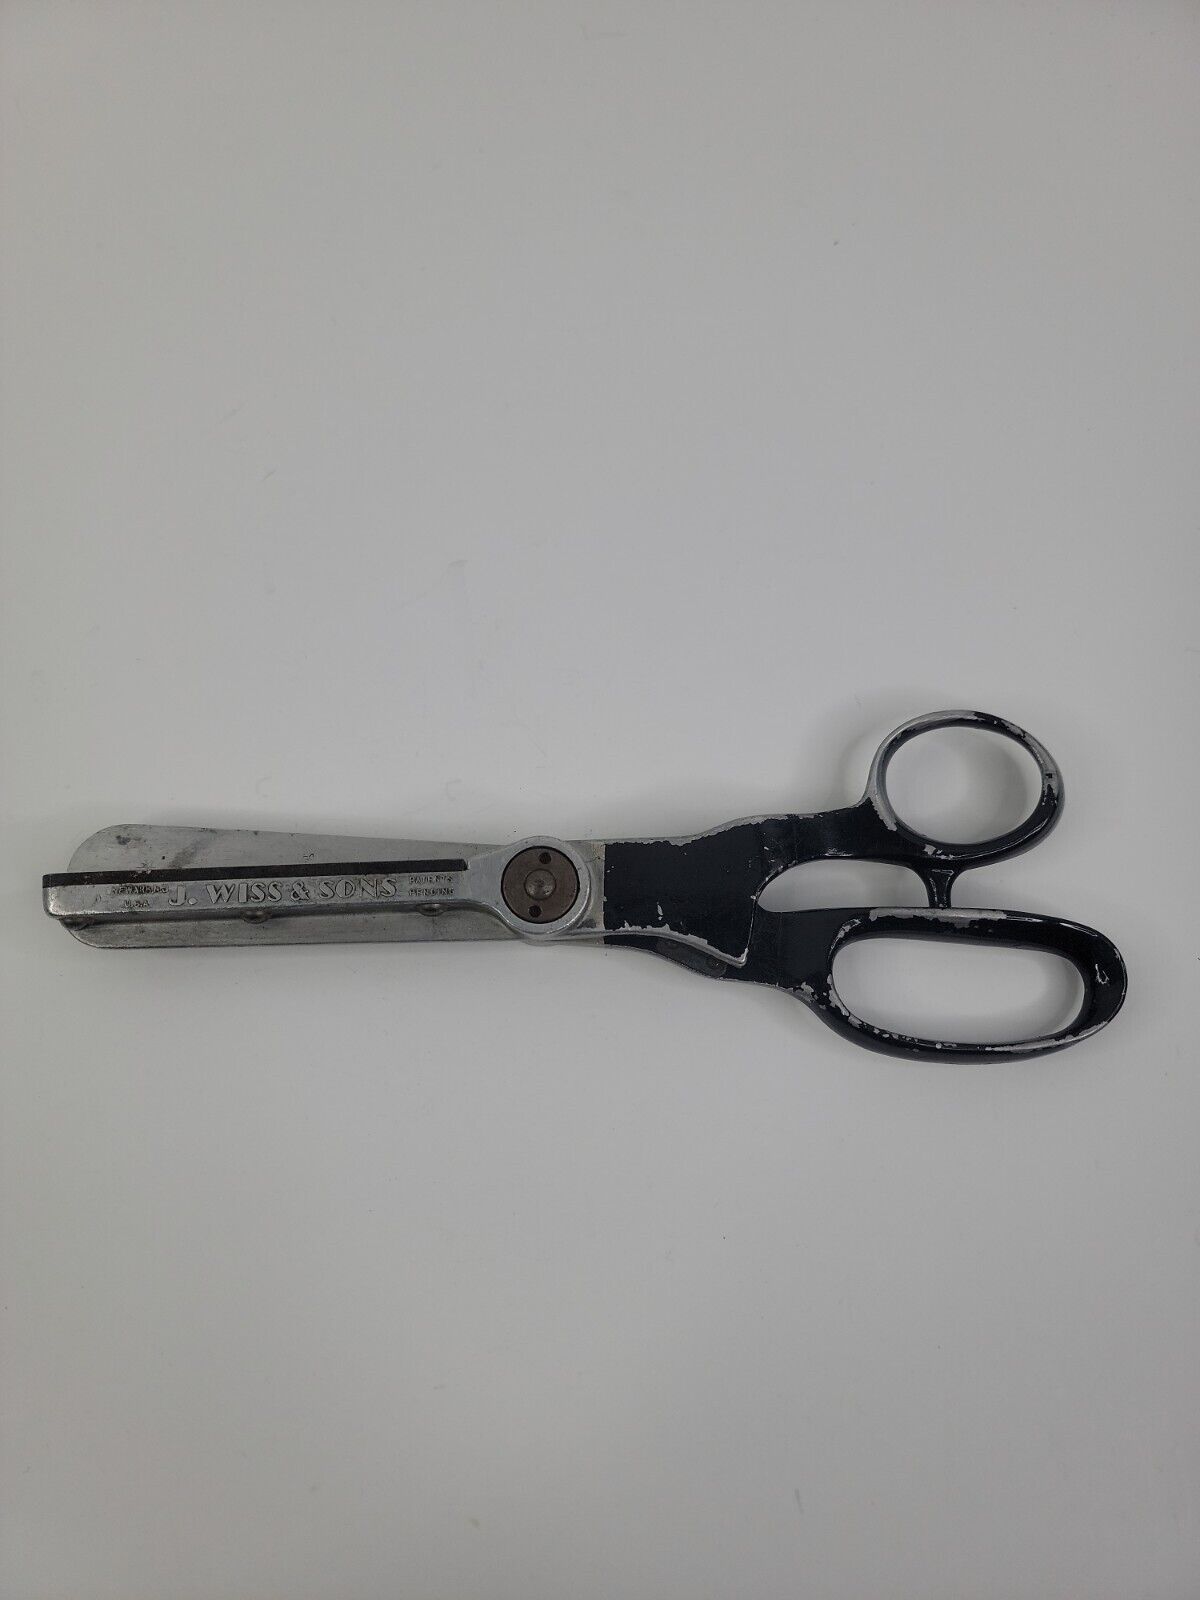 J. Wiss & Sons Scissors pinking shears Fabric Tailor 11\